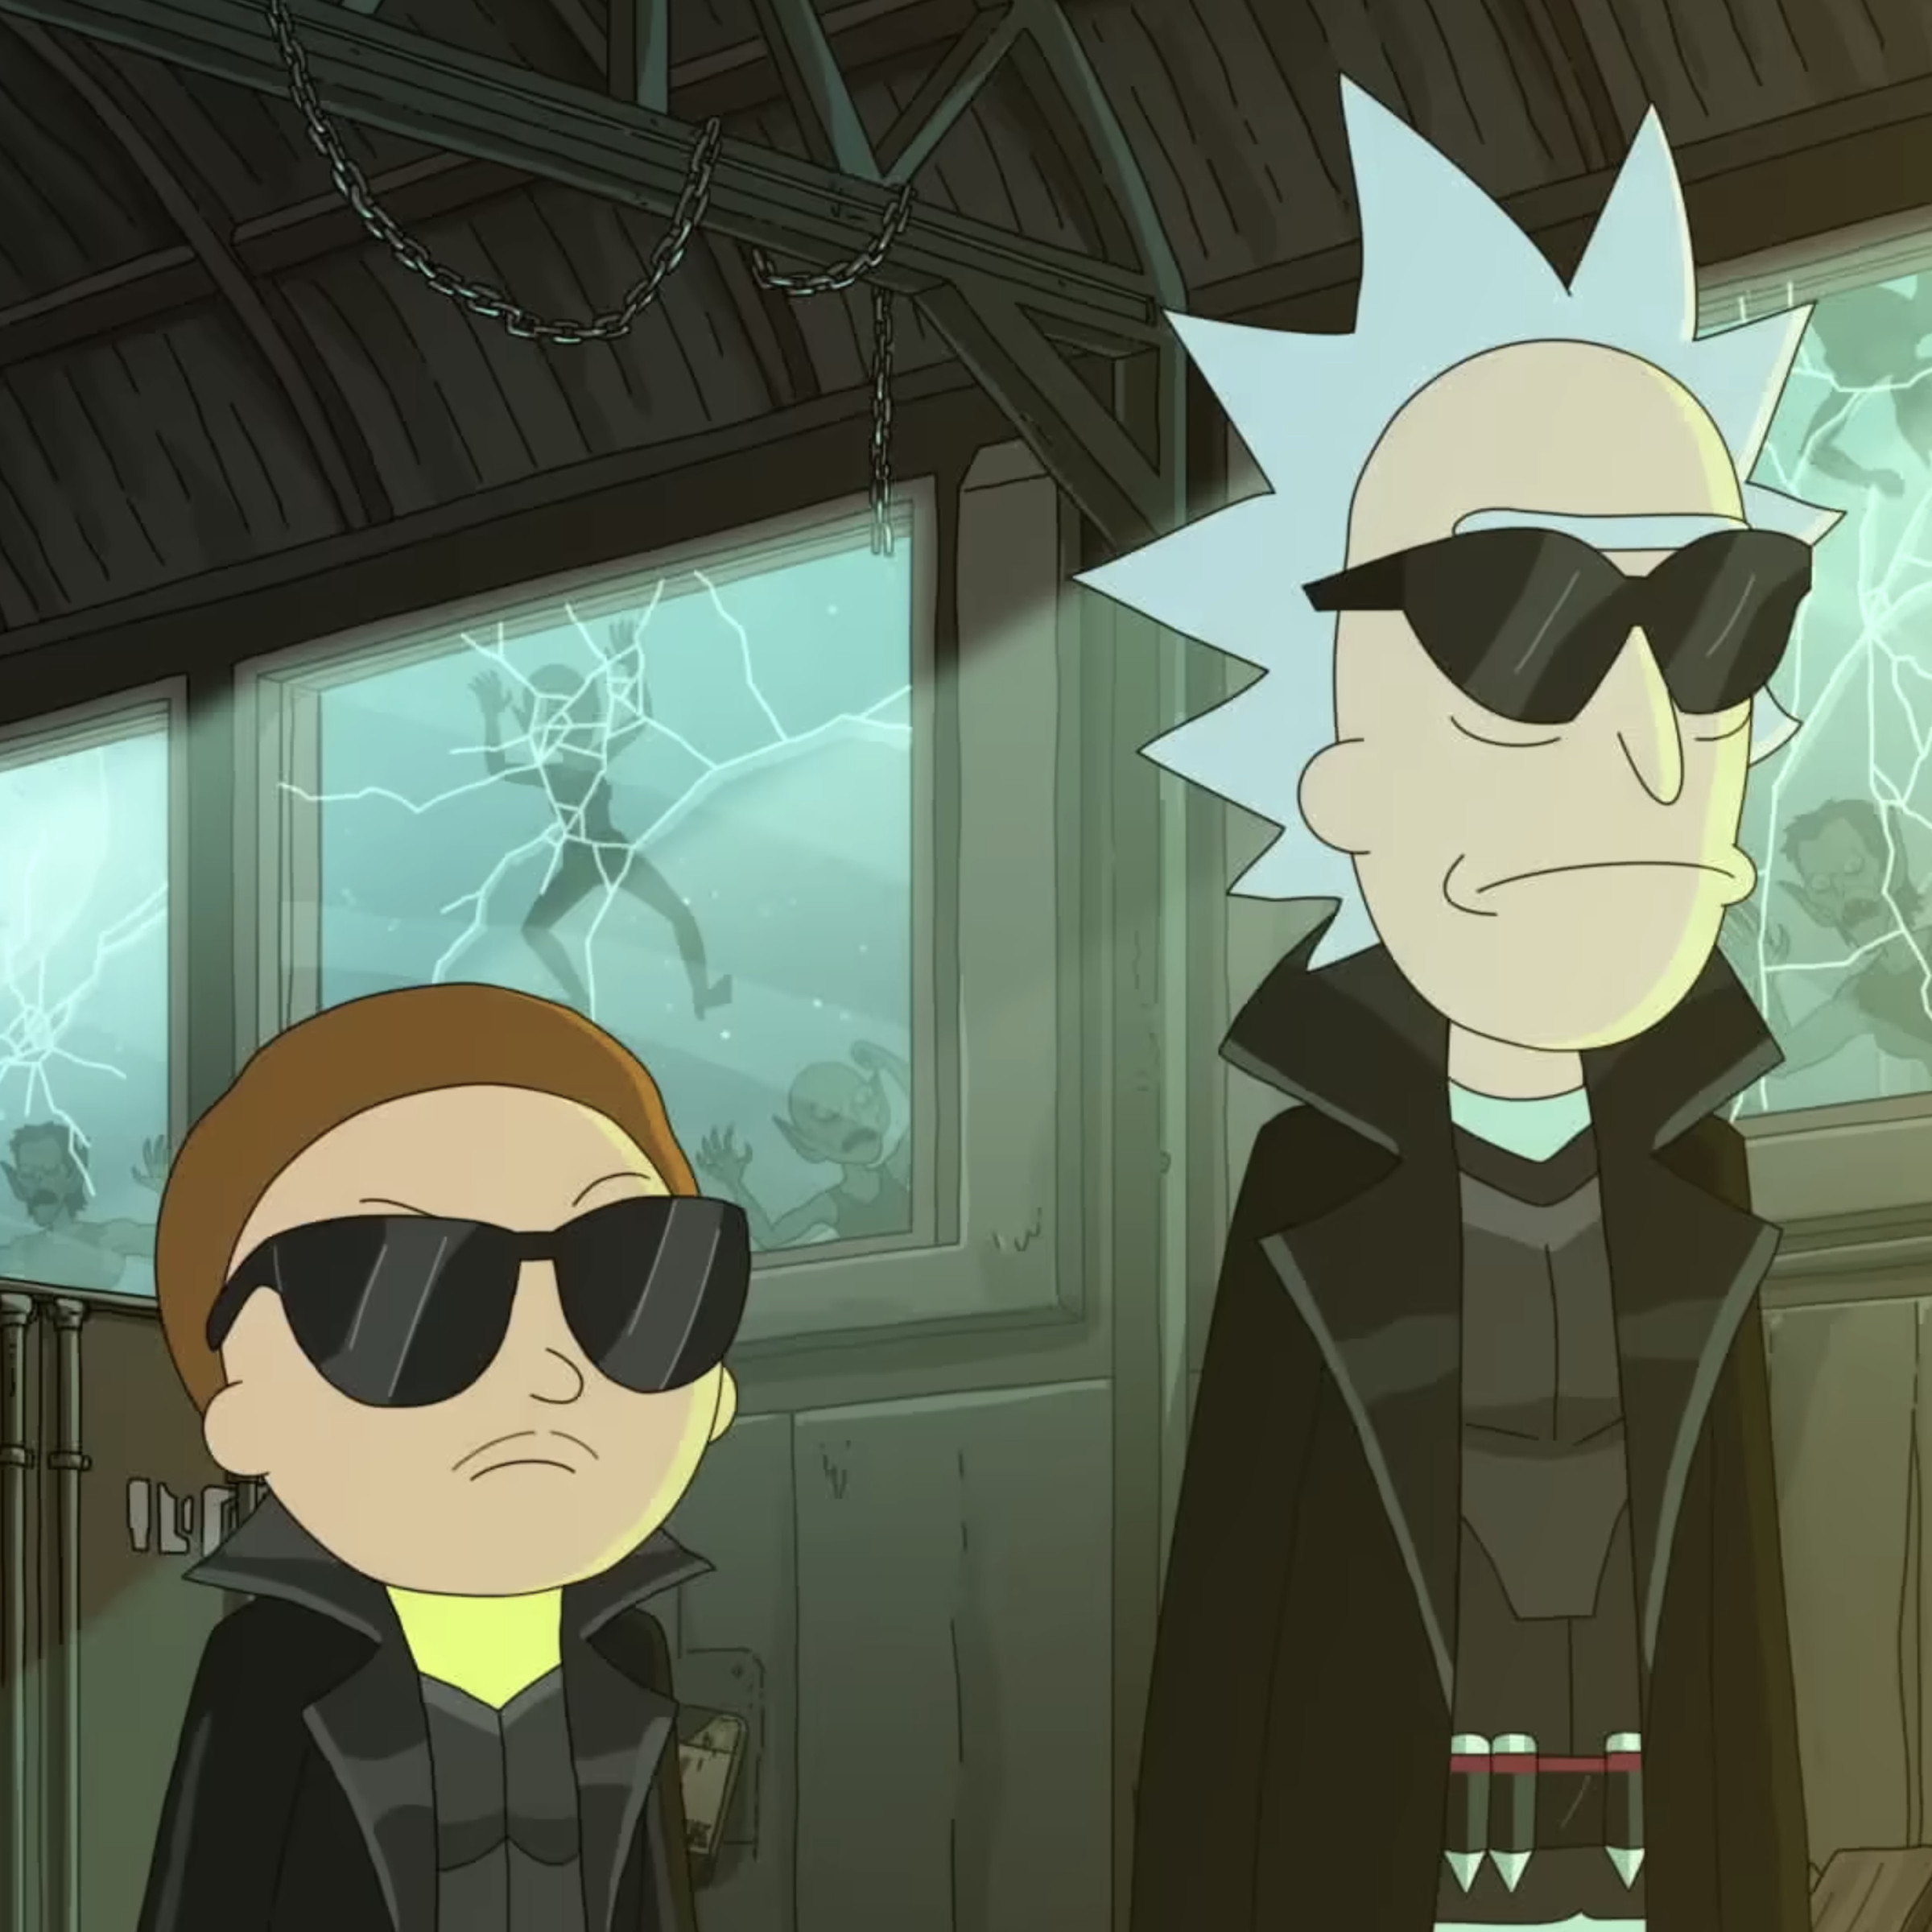 Morty and Rick on a mission.